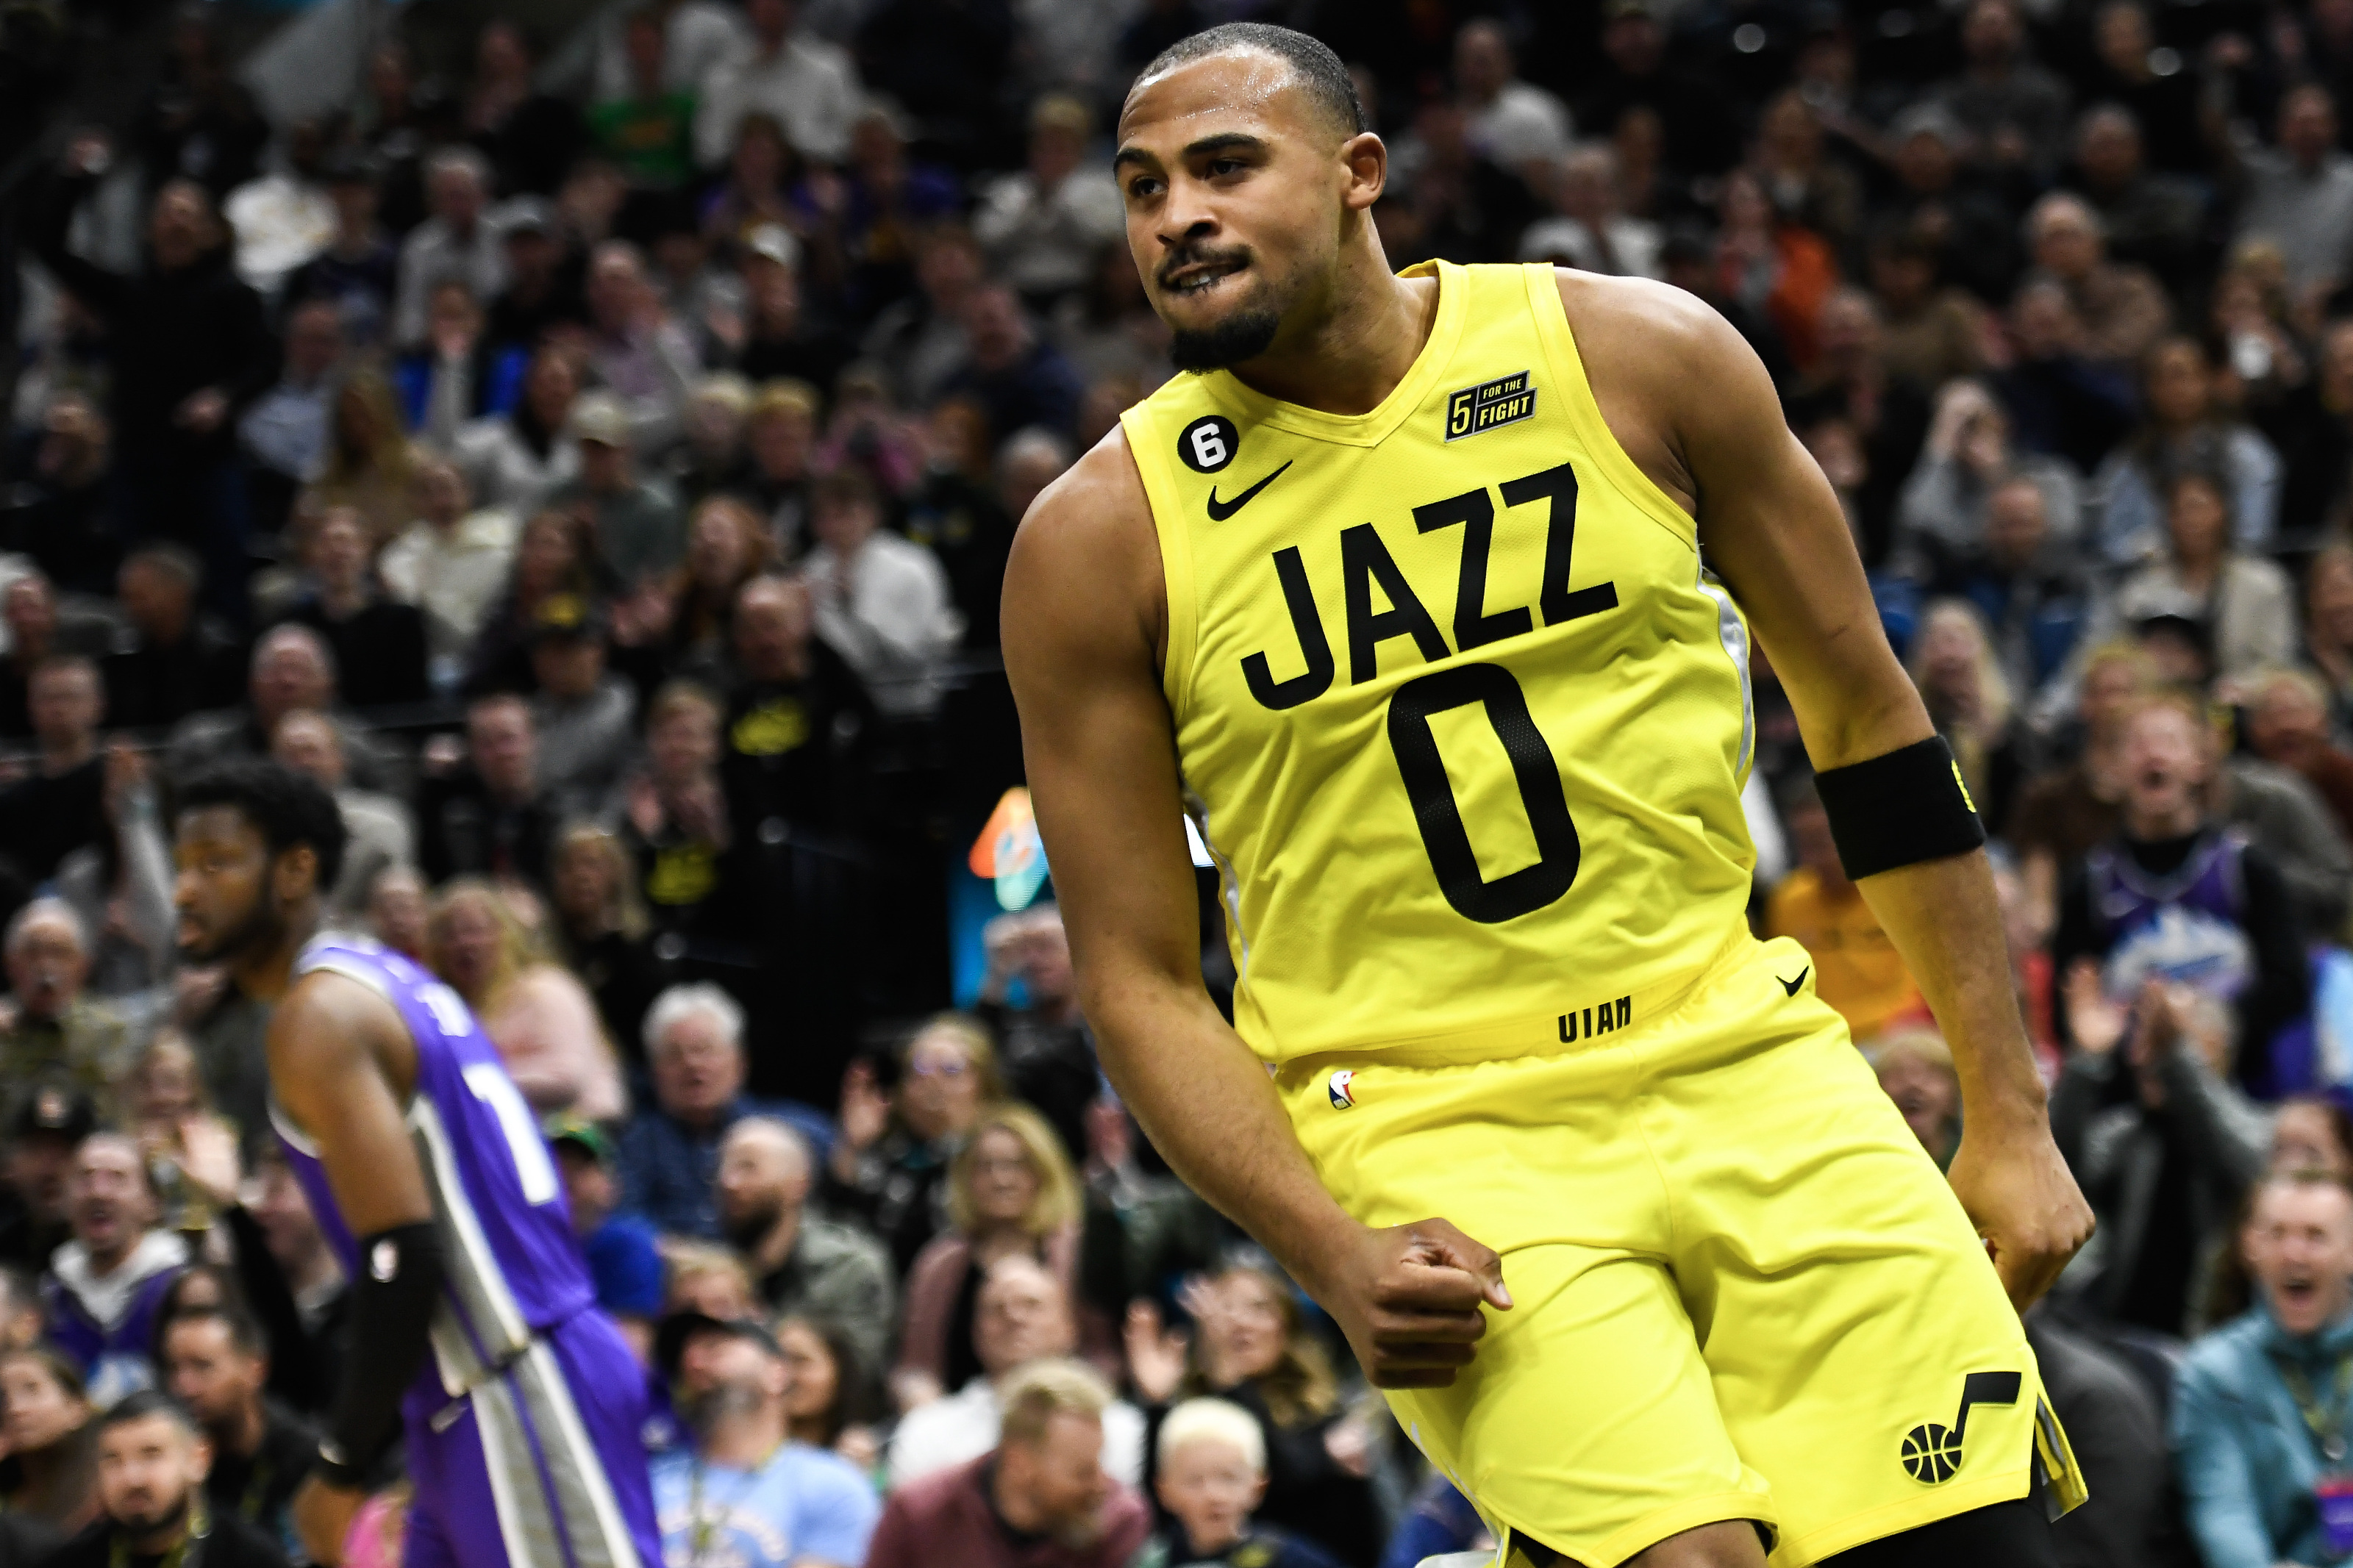 HBTJ Newsletter: Taking a look at Talen Horton-Tucker, Jazz+, and more